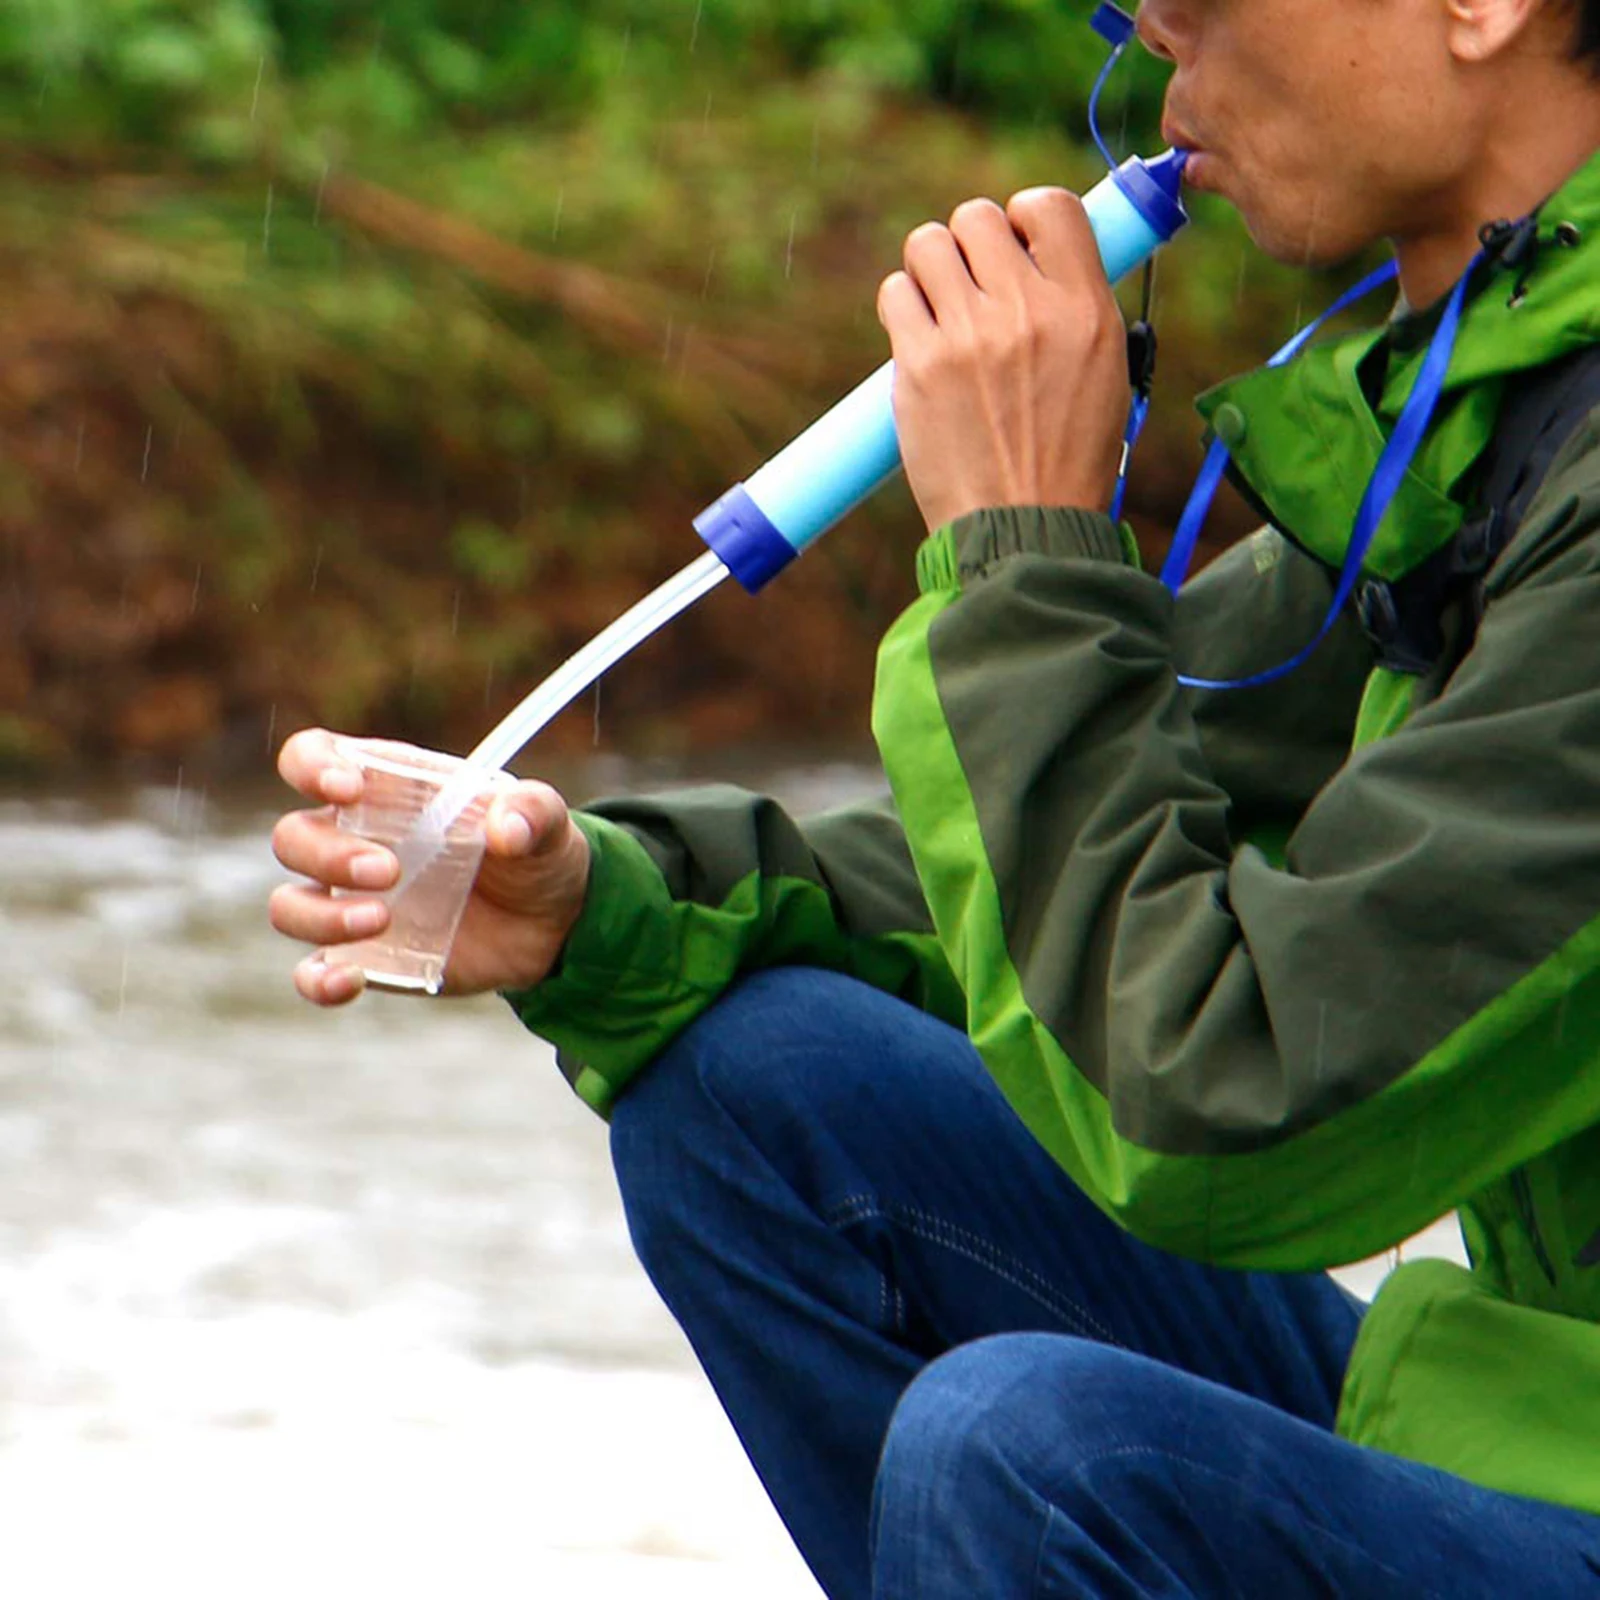 Survival Straw Personal Water Filter Purifier Emergency Filtration in